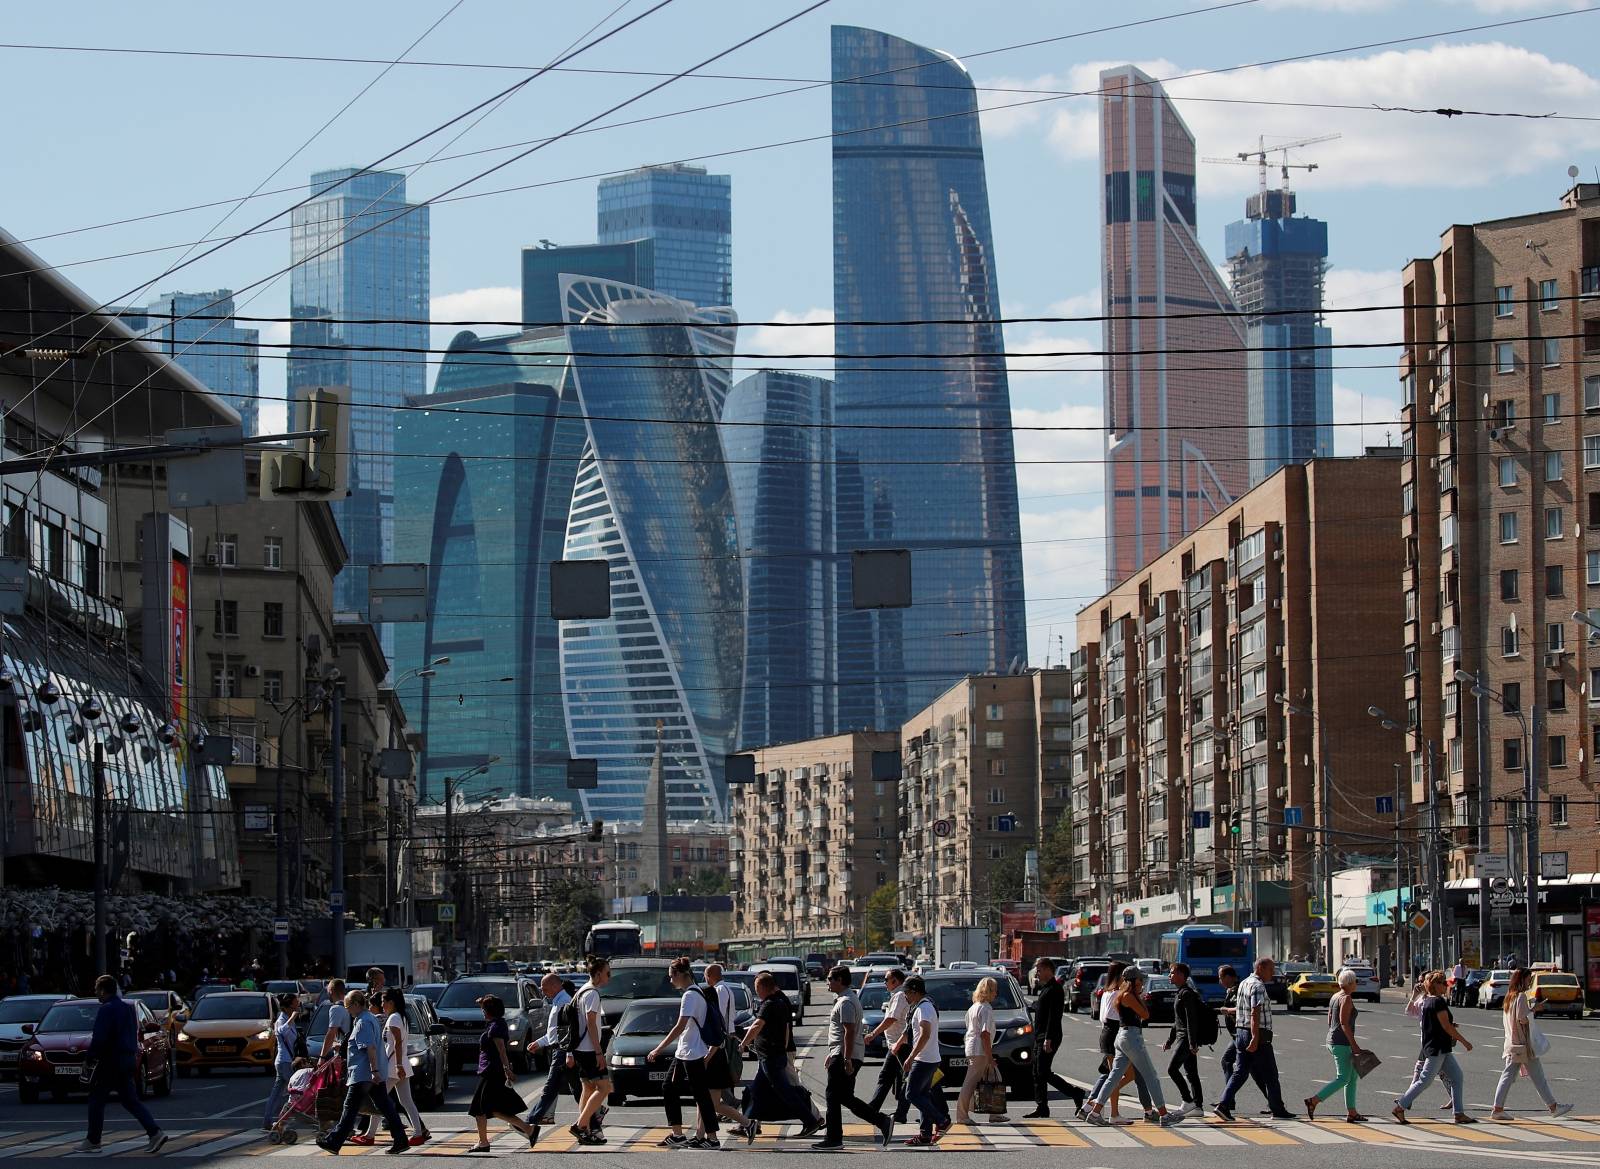 FILE PHOTO: Pedestrians cross the road as skyscrapers of the Moscow International Business Center, also known as "Moskva-City", are seen in the background in Moscow